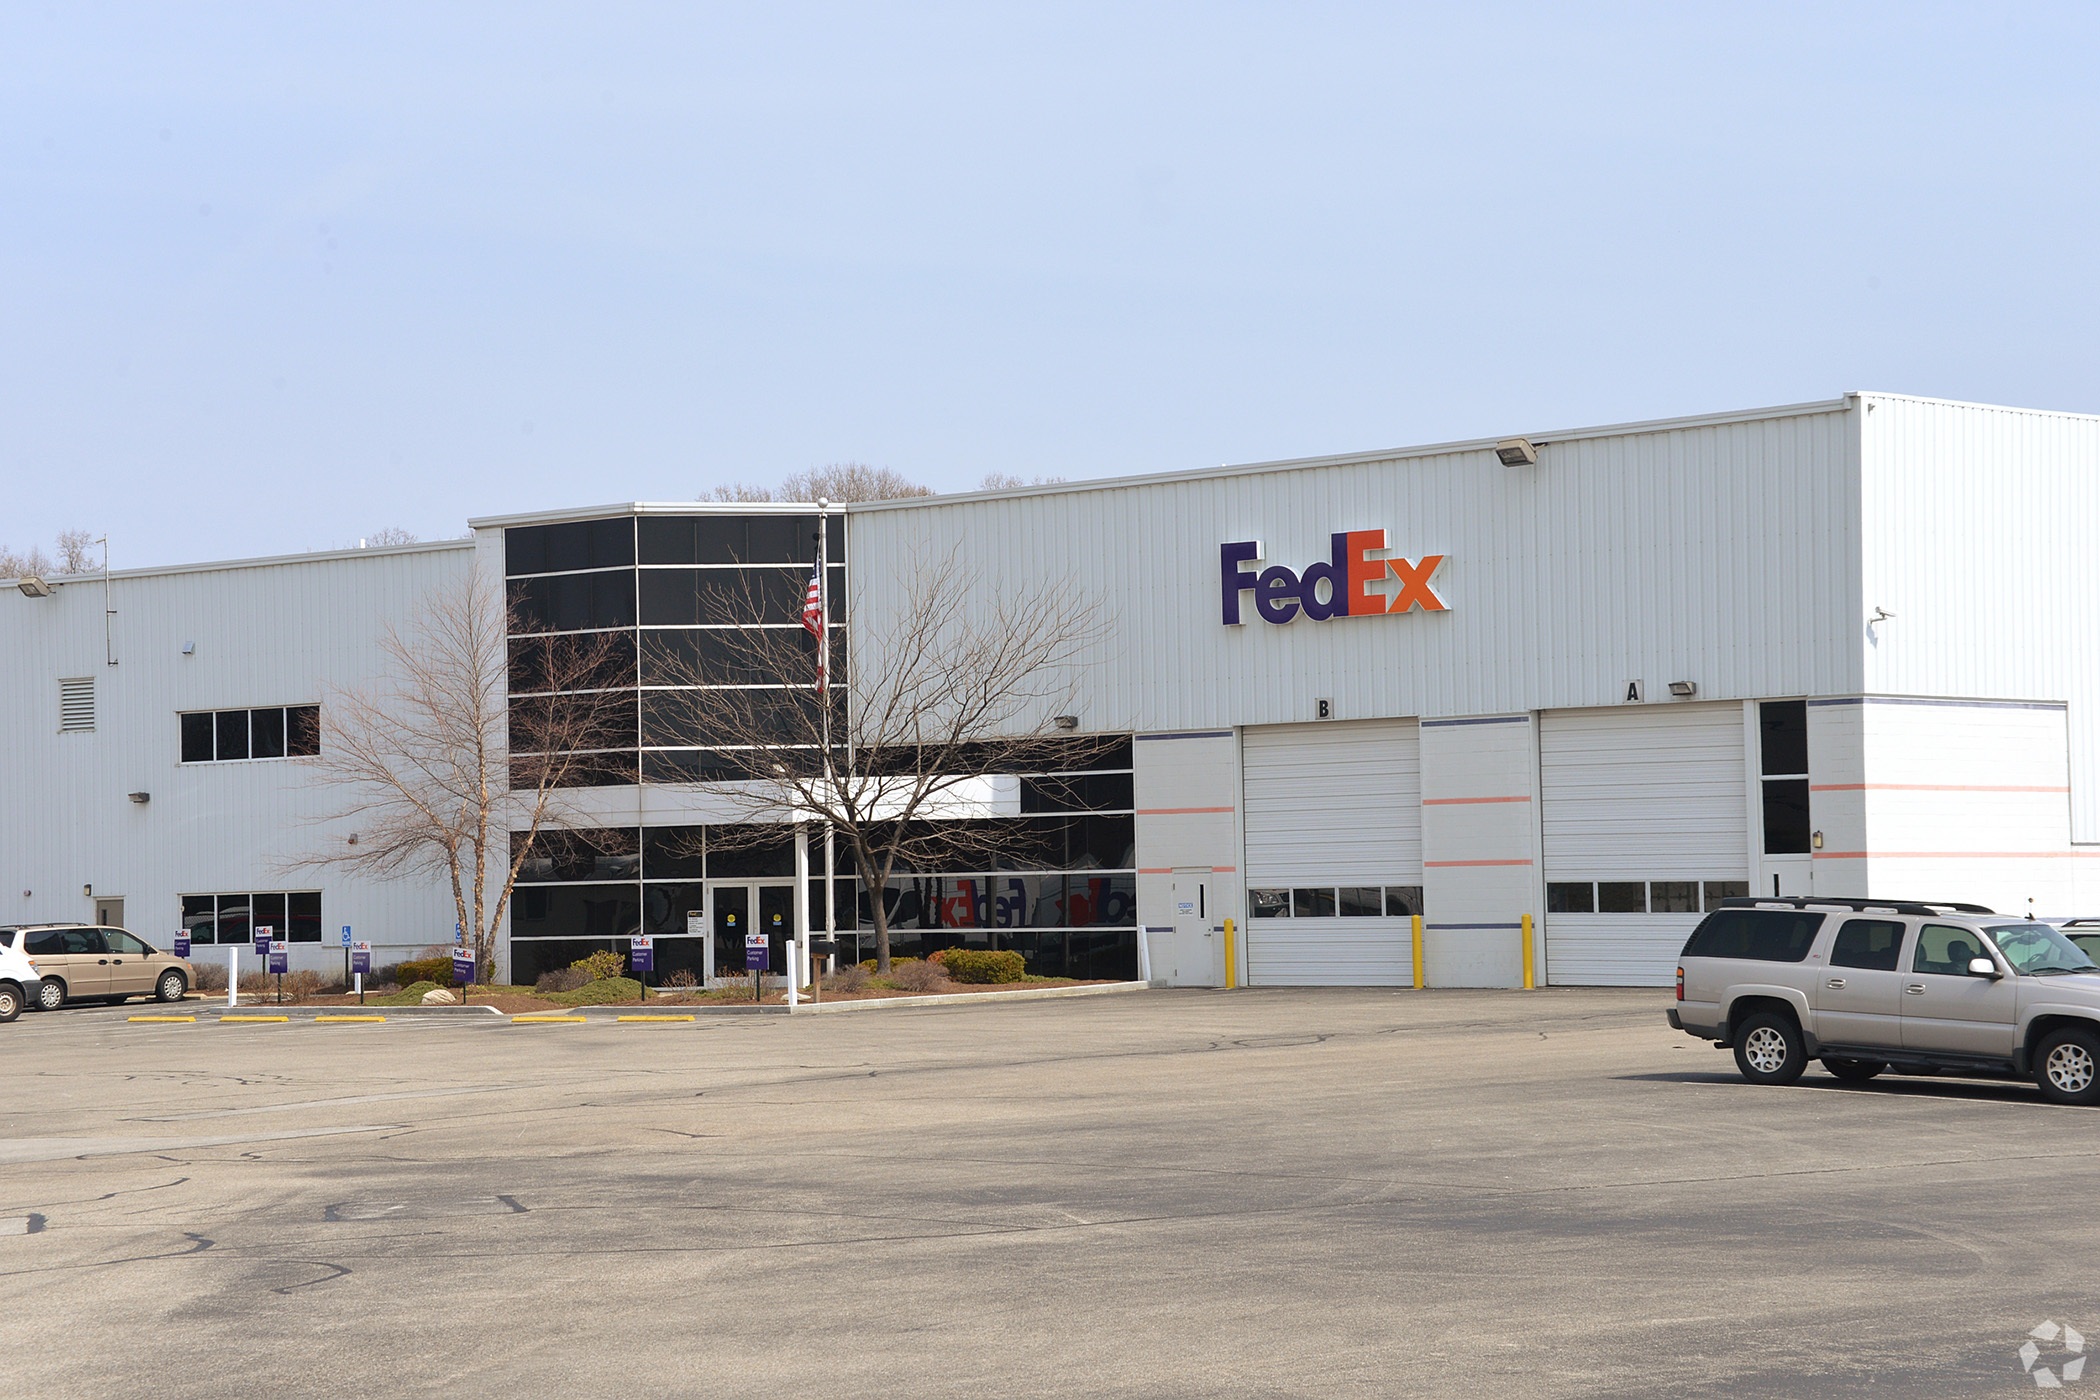 FedEx would be the largest tenant in a deal combining Global Net Lease and The Necessity Retail REIT. Global Net Lease owns this FedEx warehouse in Hebron, Kentucky. (CoStar)